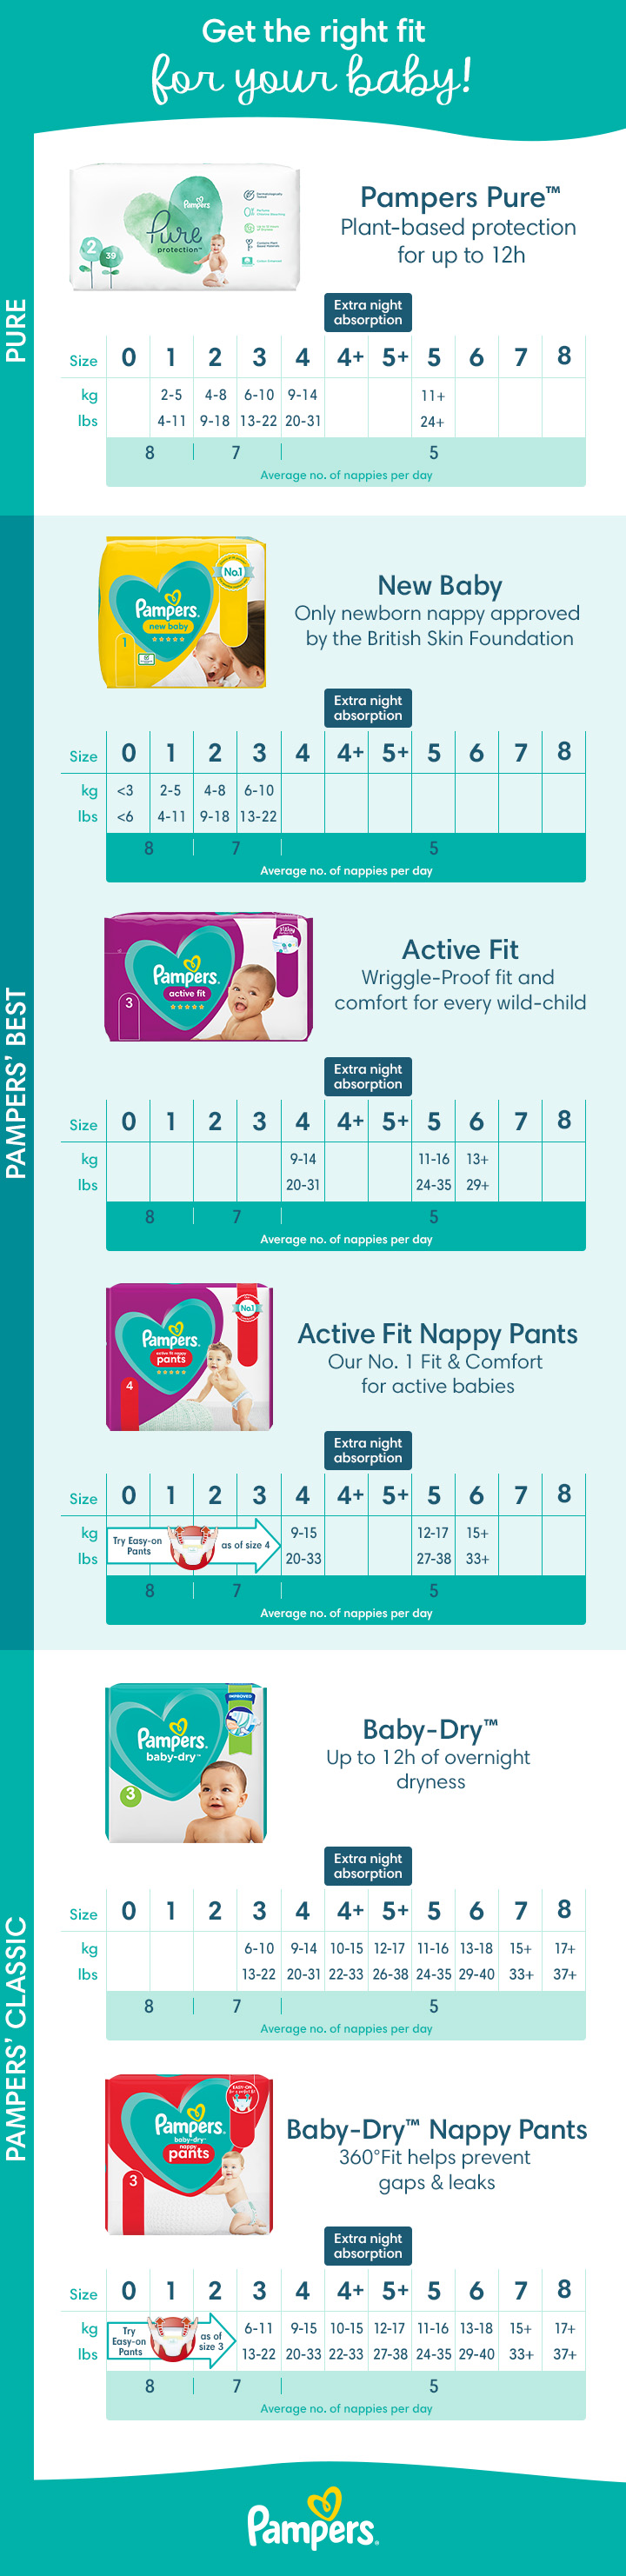 Pampers_UK_Diaper_Size_And_Weight_Comparison_Chart_720px.jpg